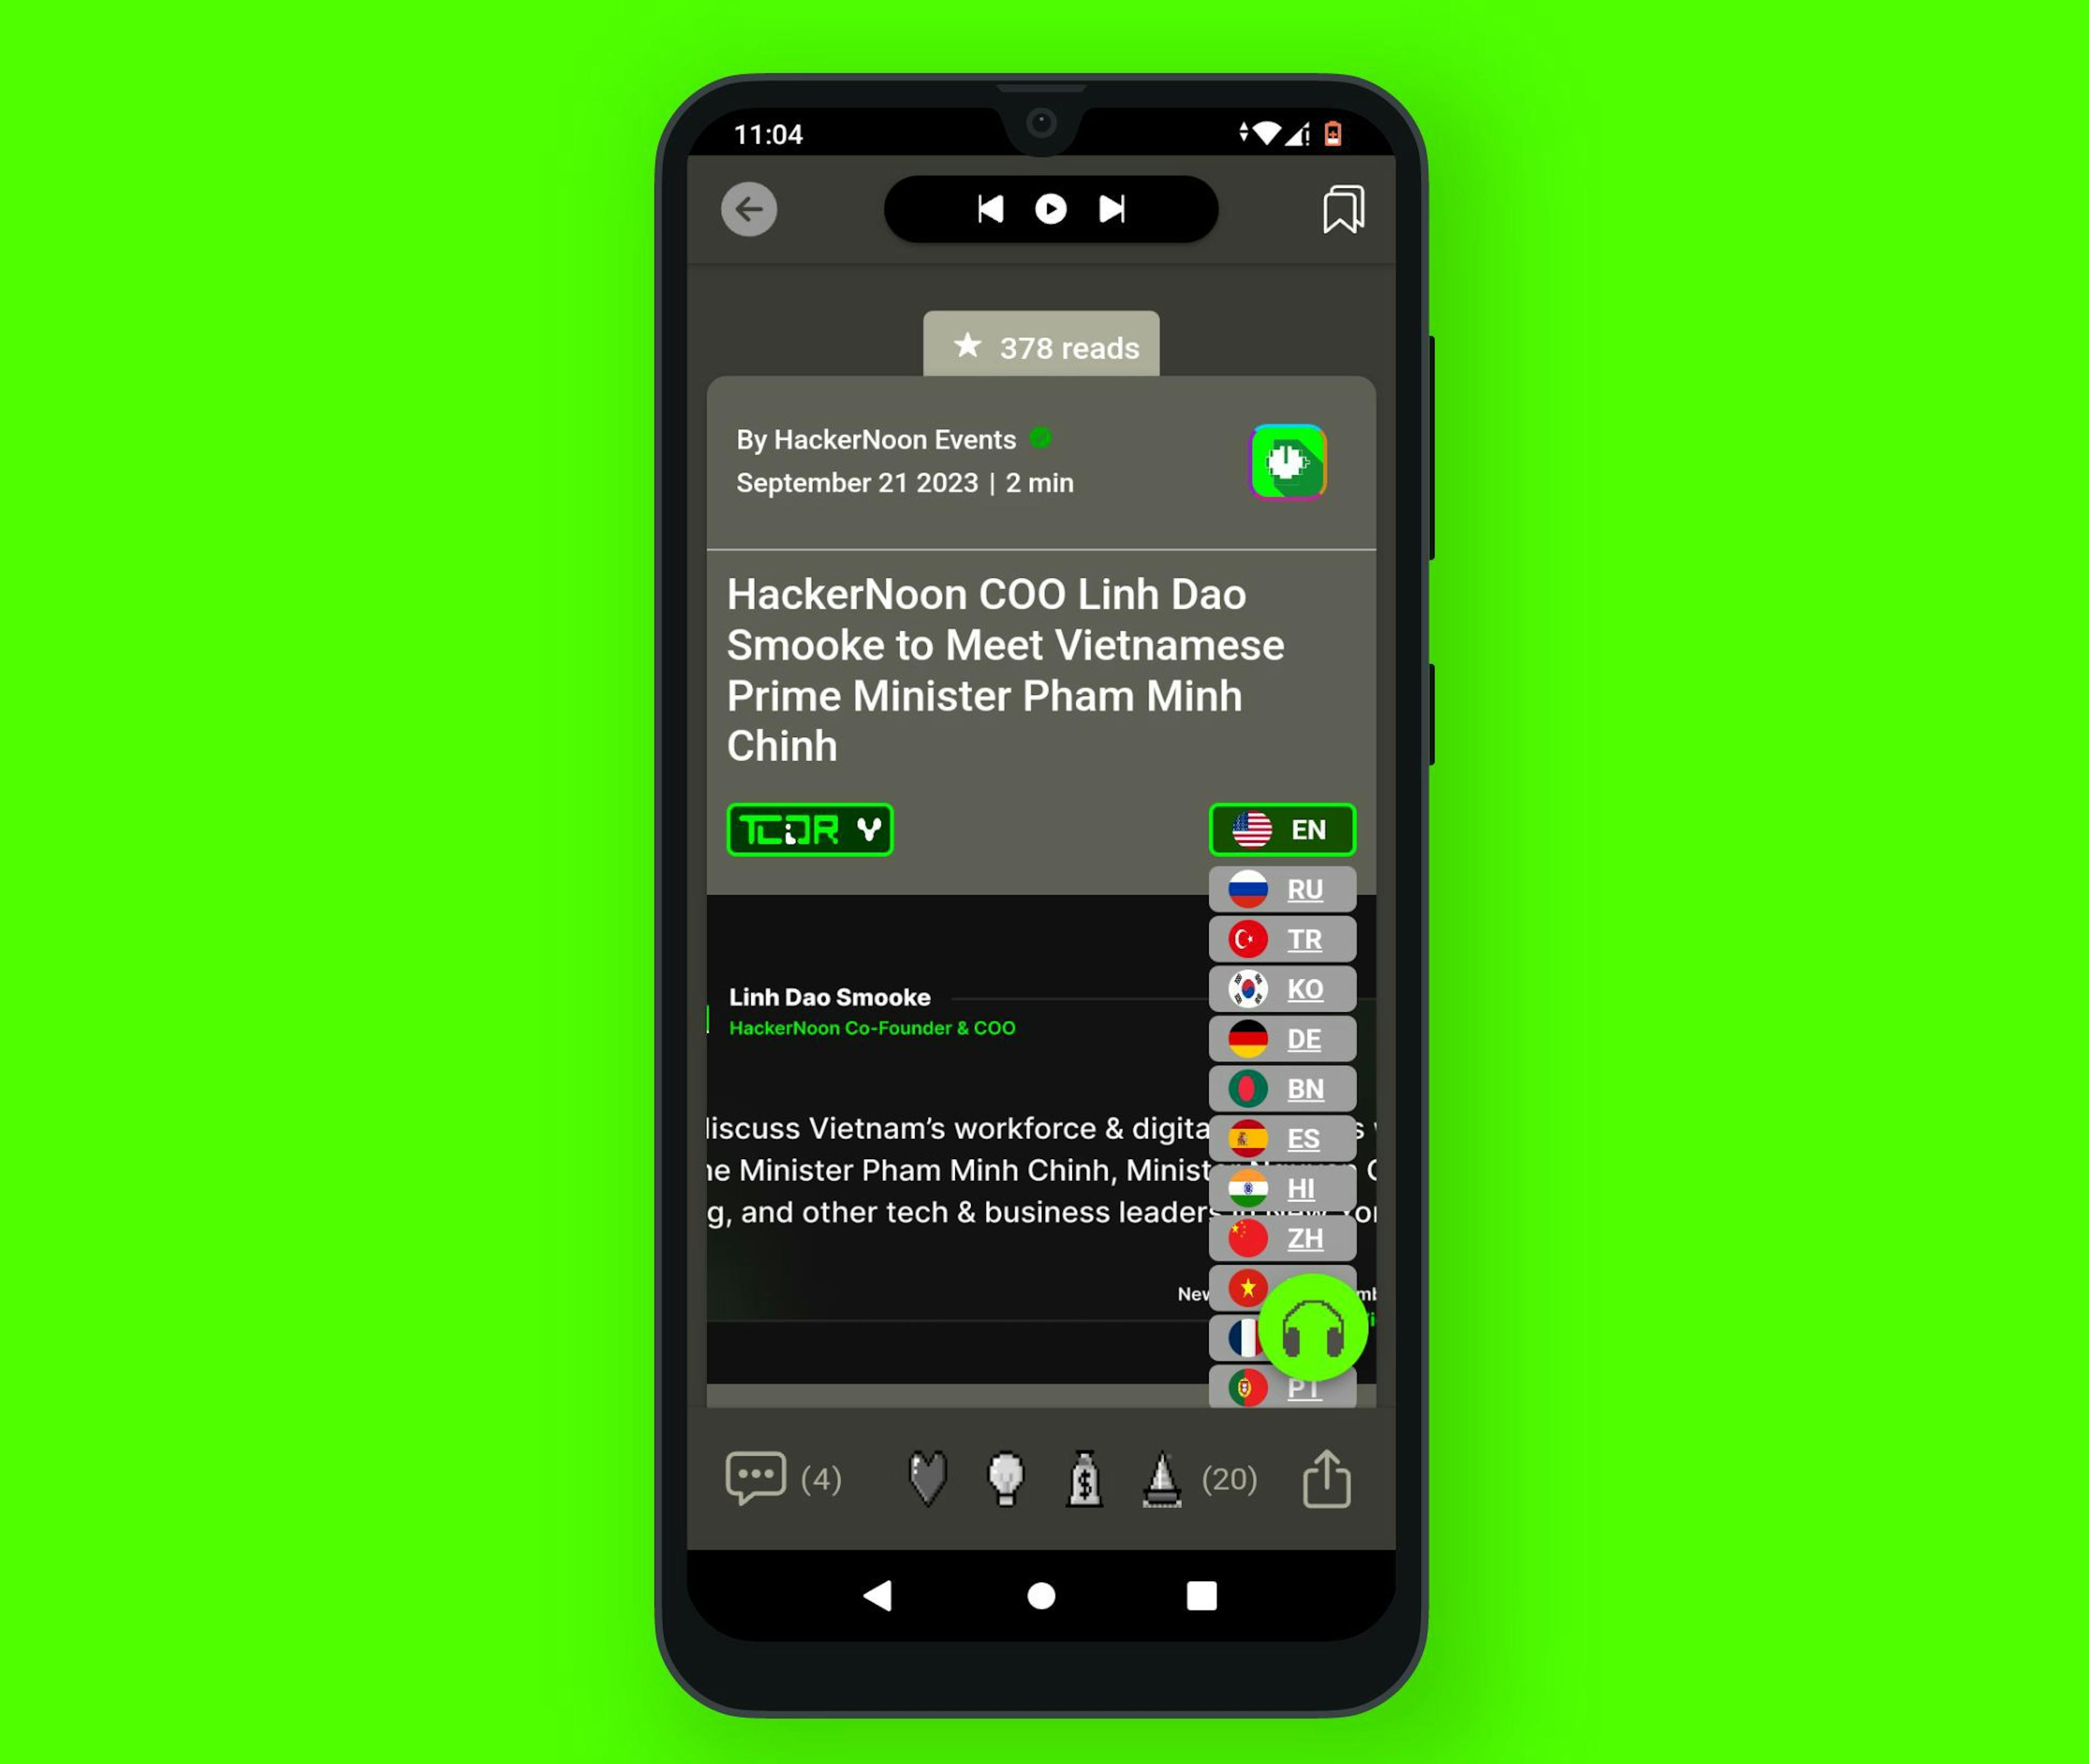 Translation feature in action on HackerNoon Mobile App